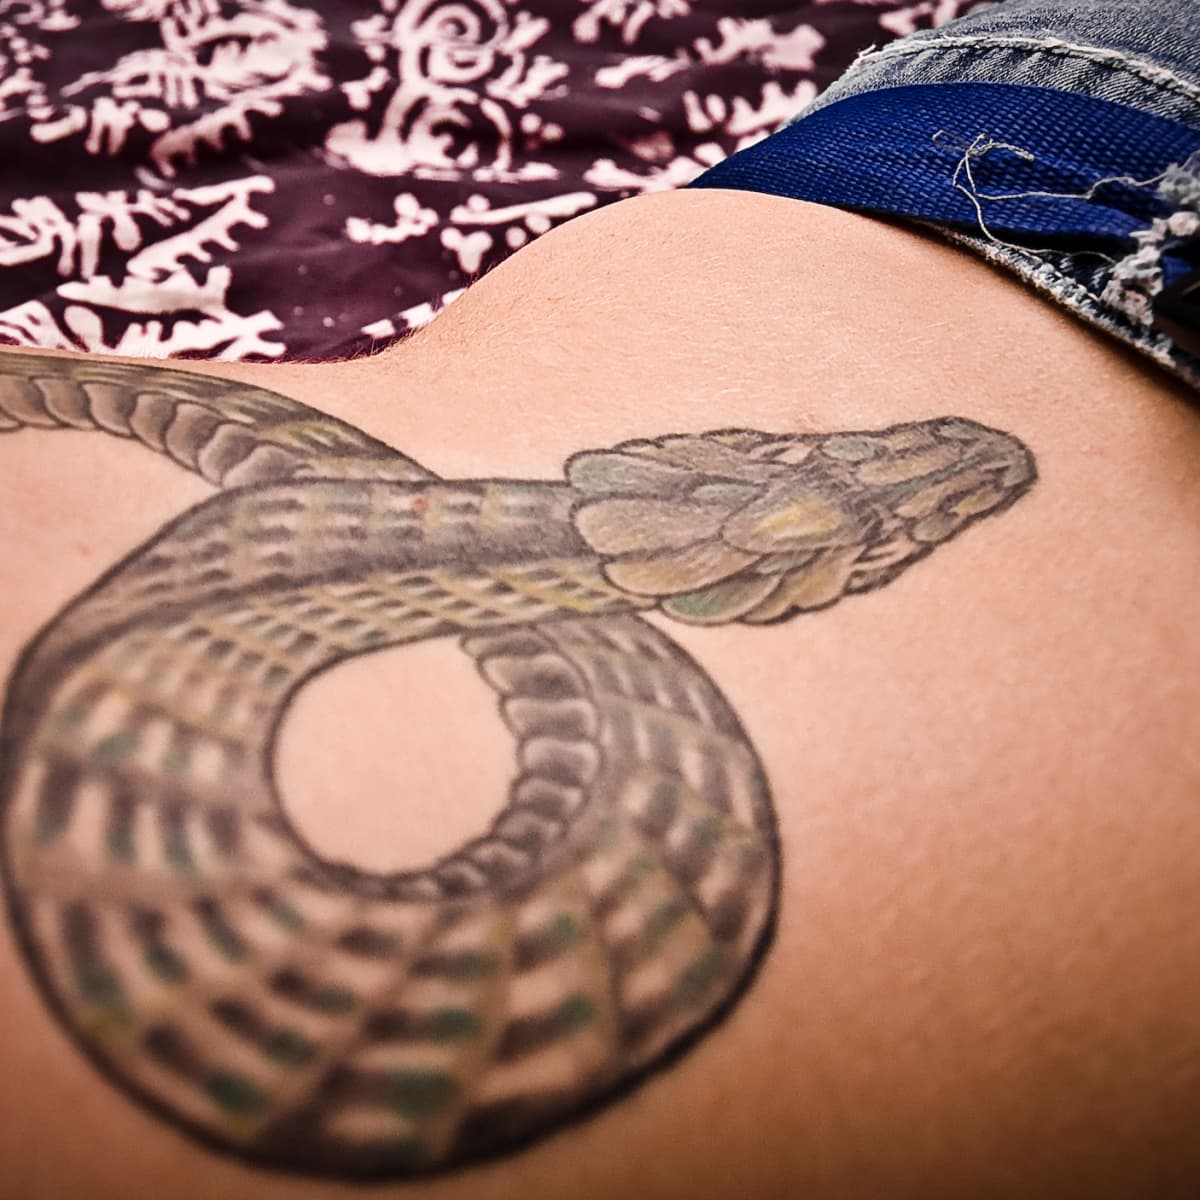 What Does A Snake Tattoo Symbolize?